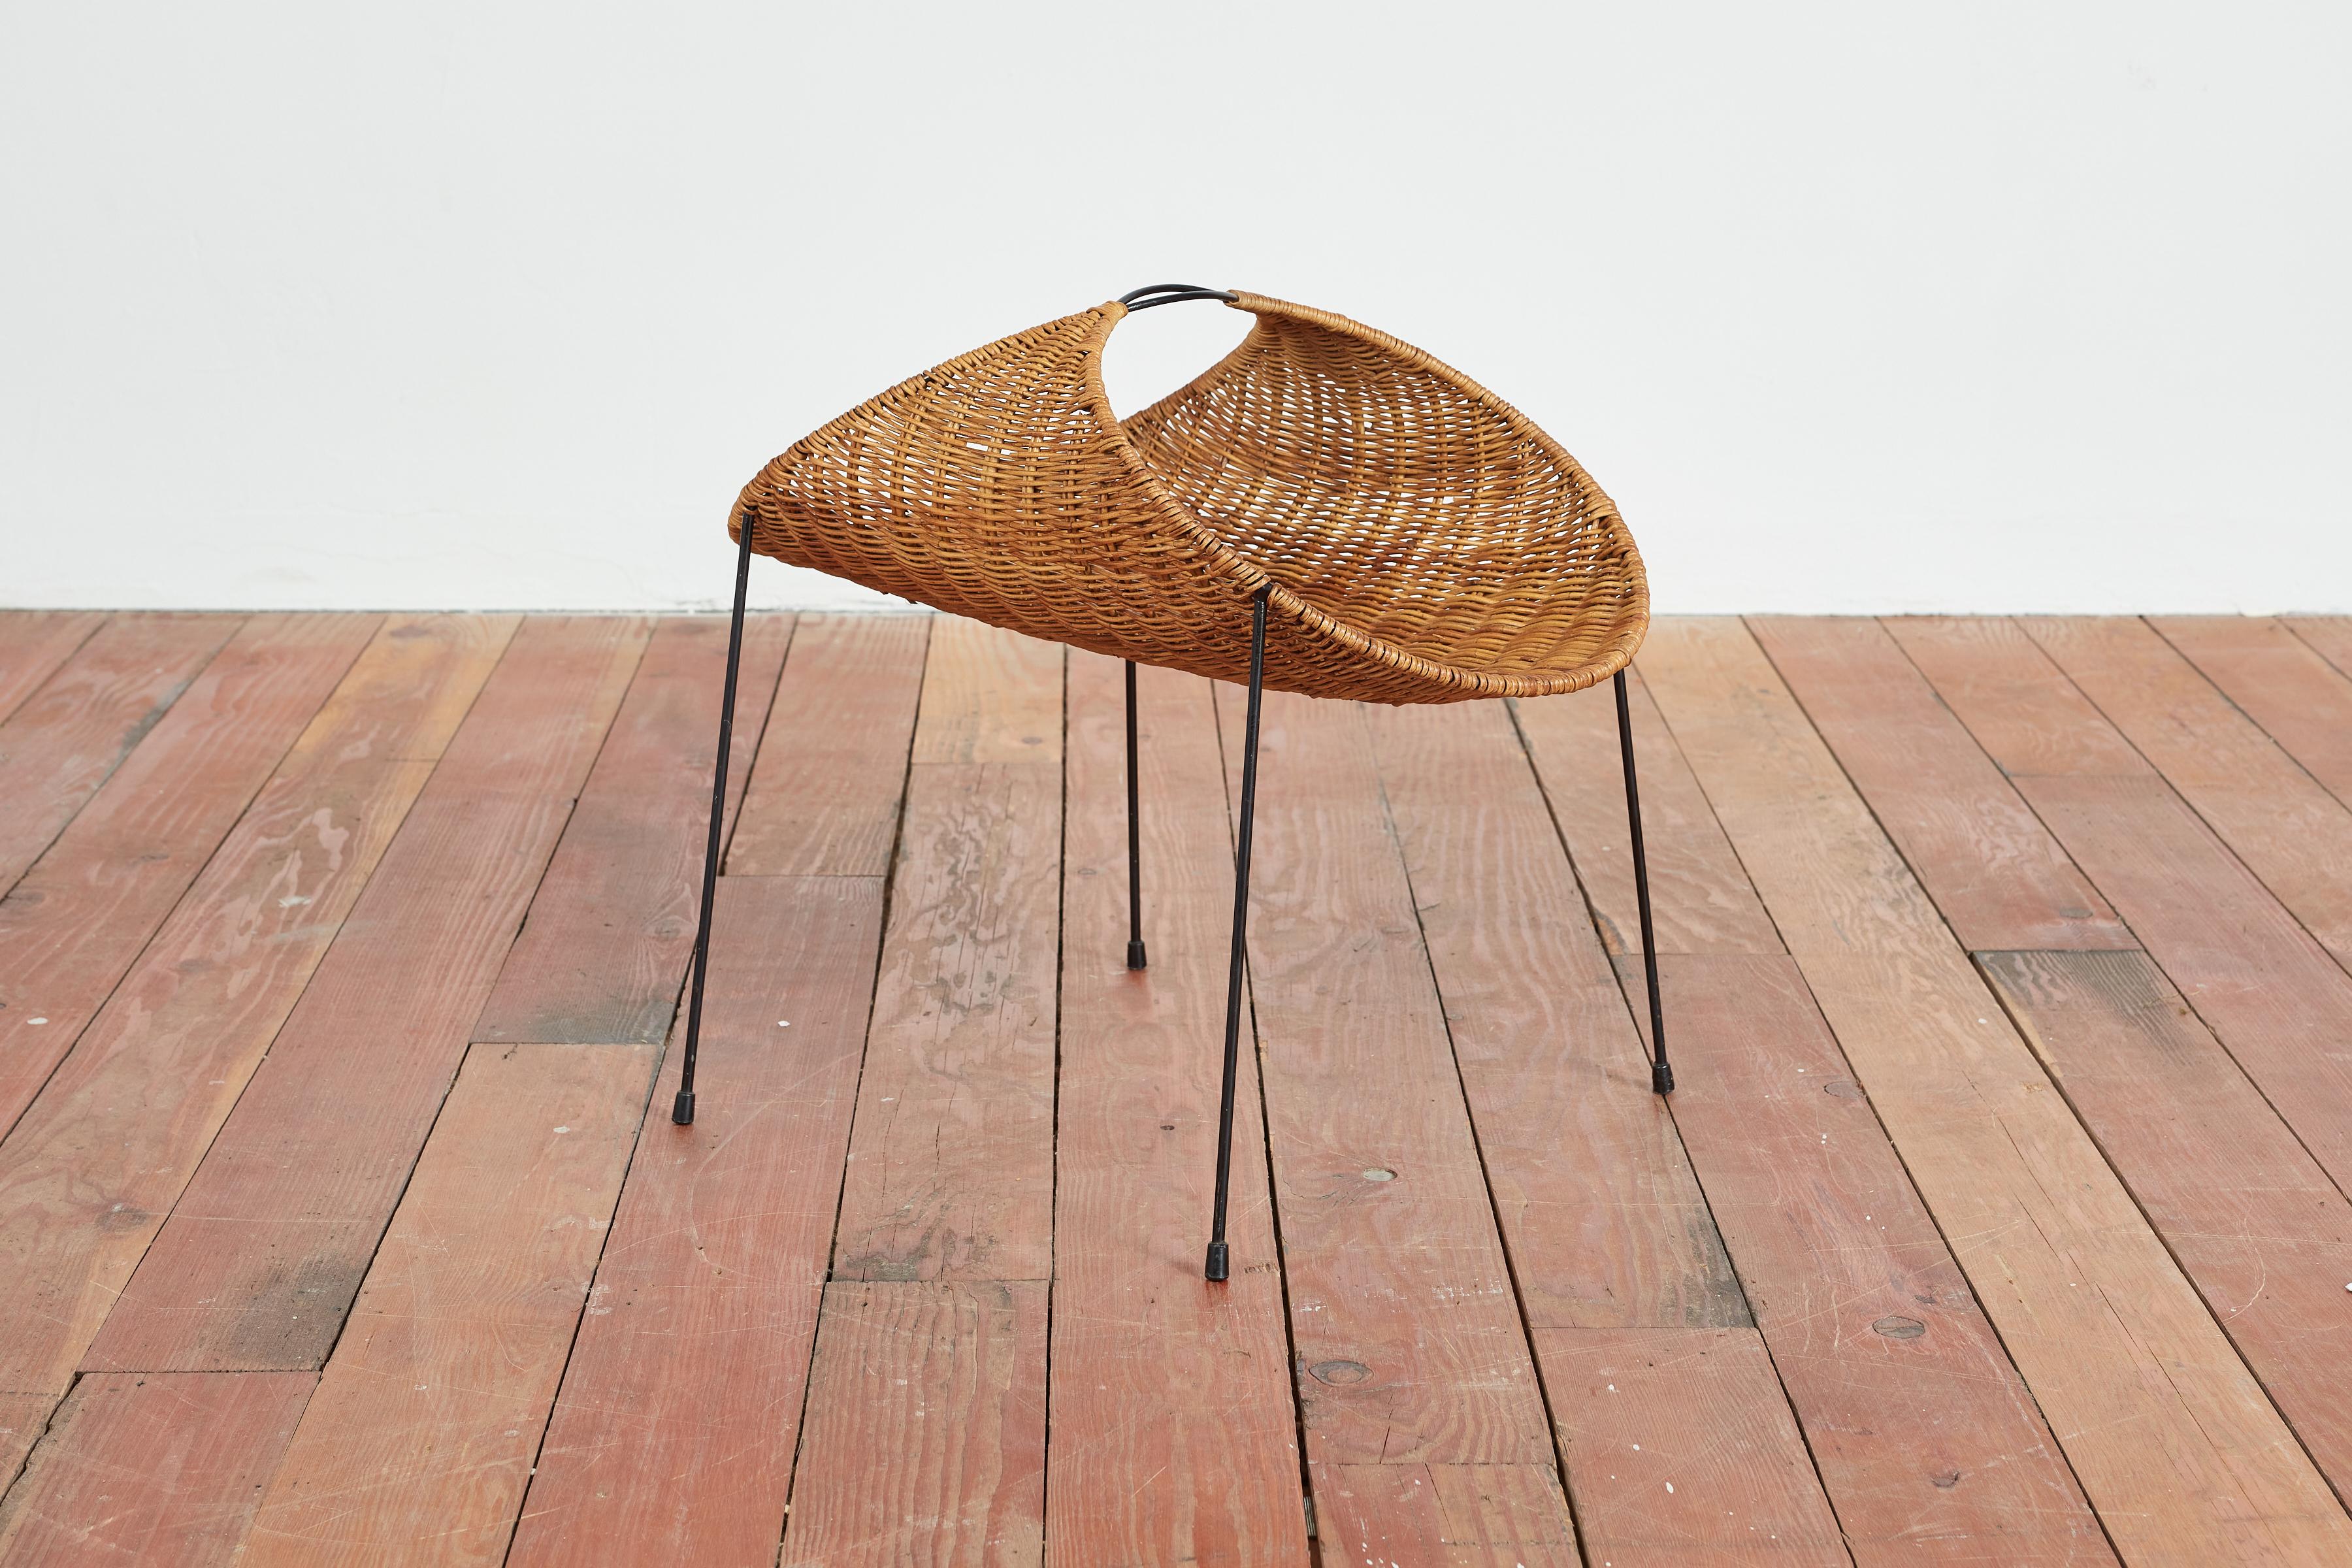 Campo & Graffi Magazine Rack in Wicker and Black Enameled Iron
Wonderful scuptural shape with handle 
Italy 1950s